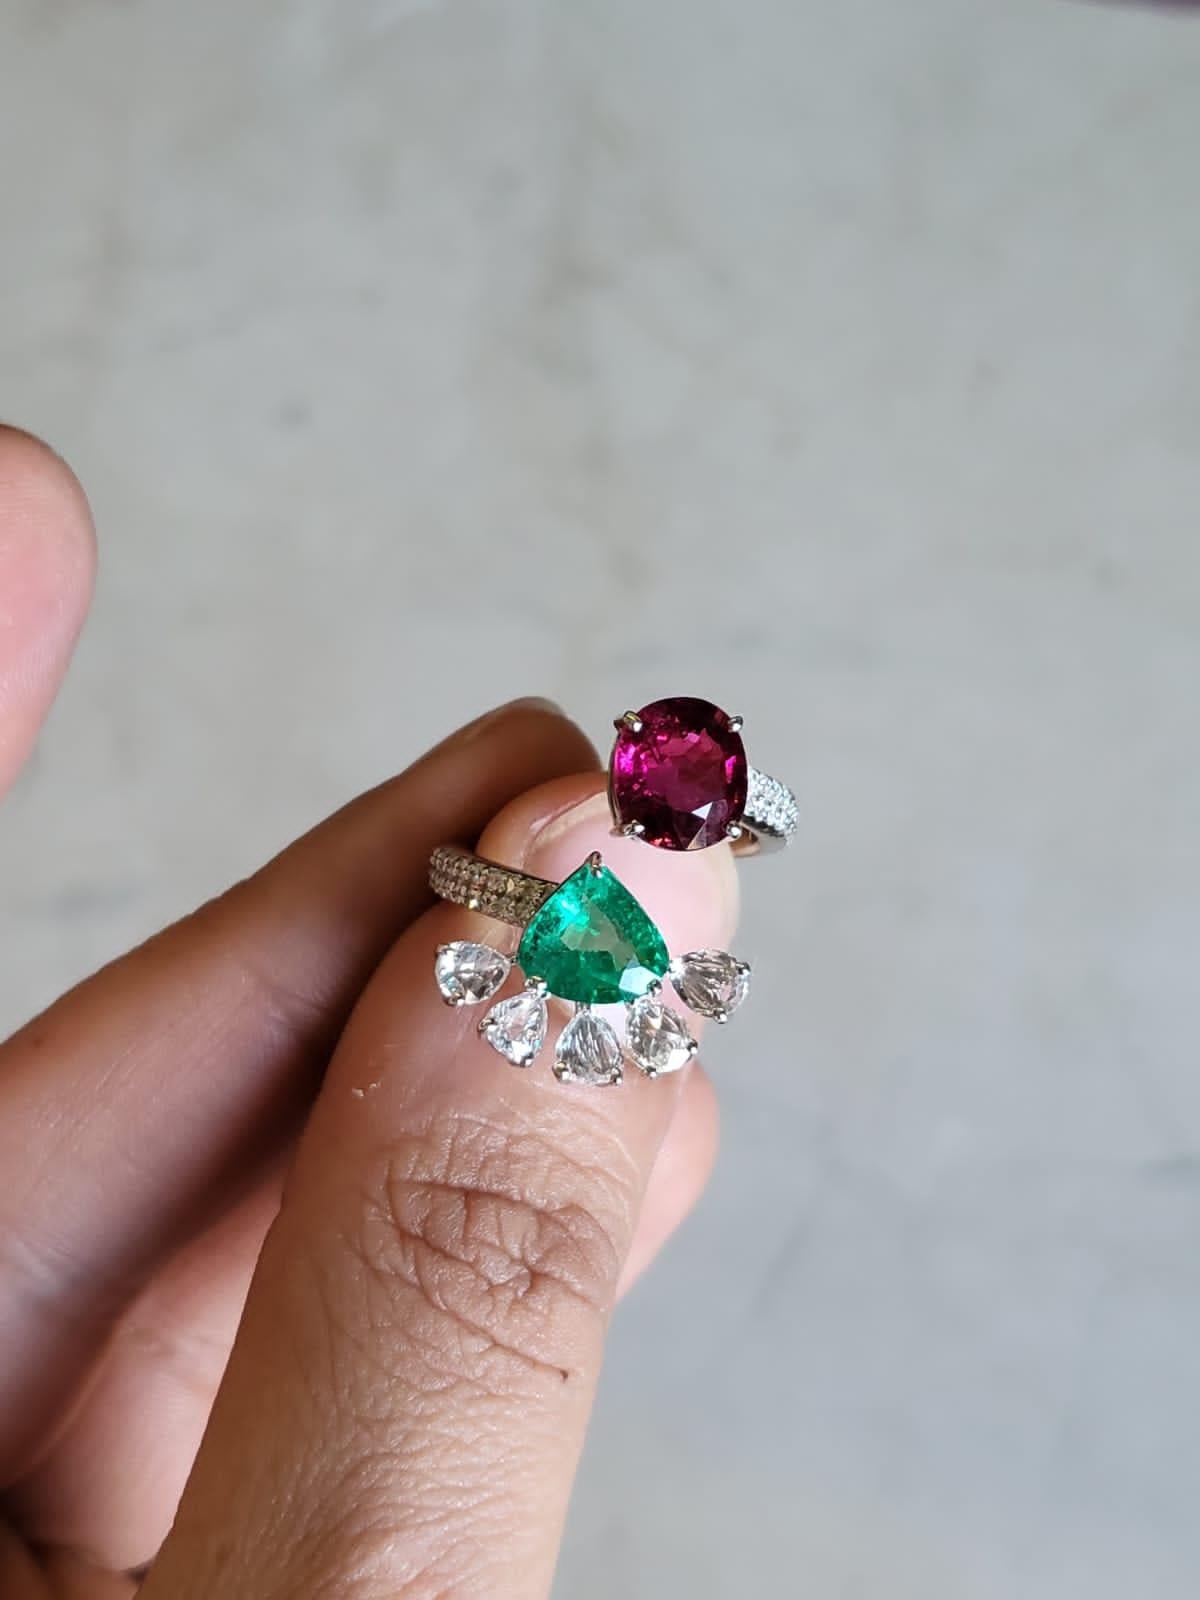 A very gorgeous and of a kind, Emerald & Rubellite Engagement/ Cocktail Ring set in 18K White Gold. The weight of the Emerald is 1.41 carats. The Emerald is completely natural, without any treatment and is of Zambian origin. The weight of the